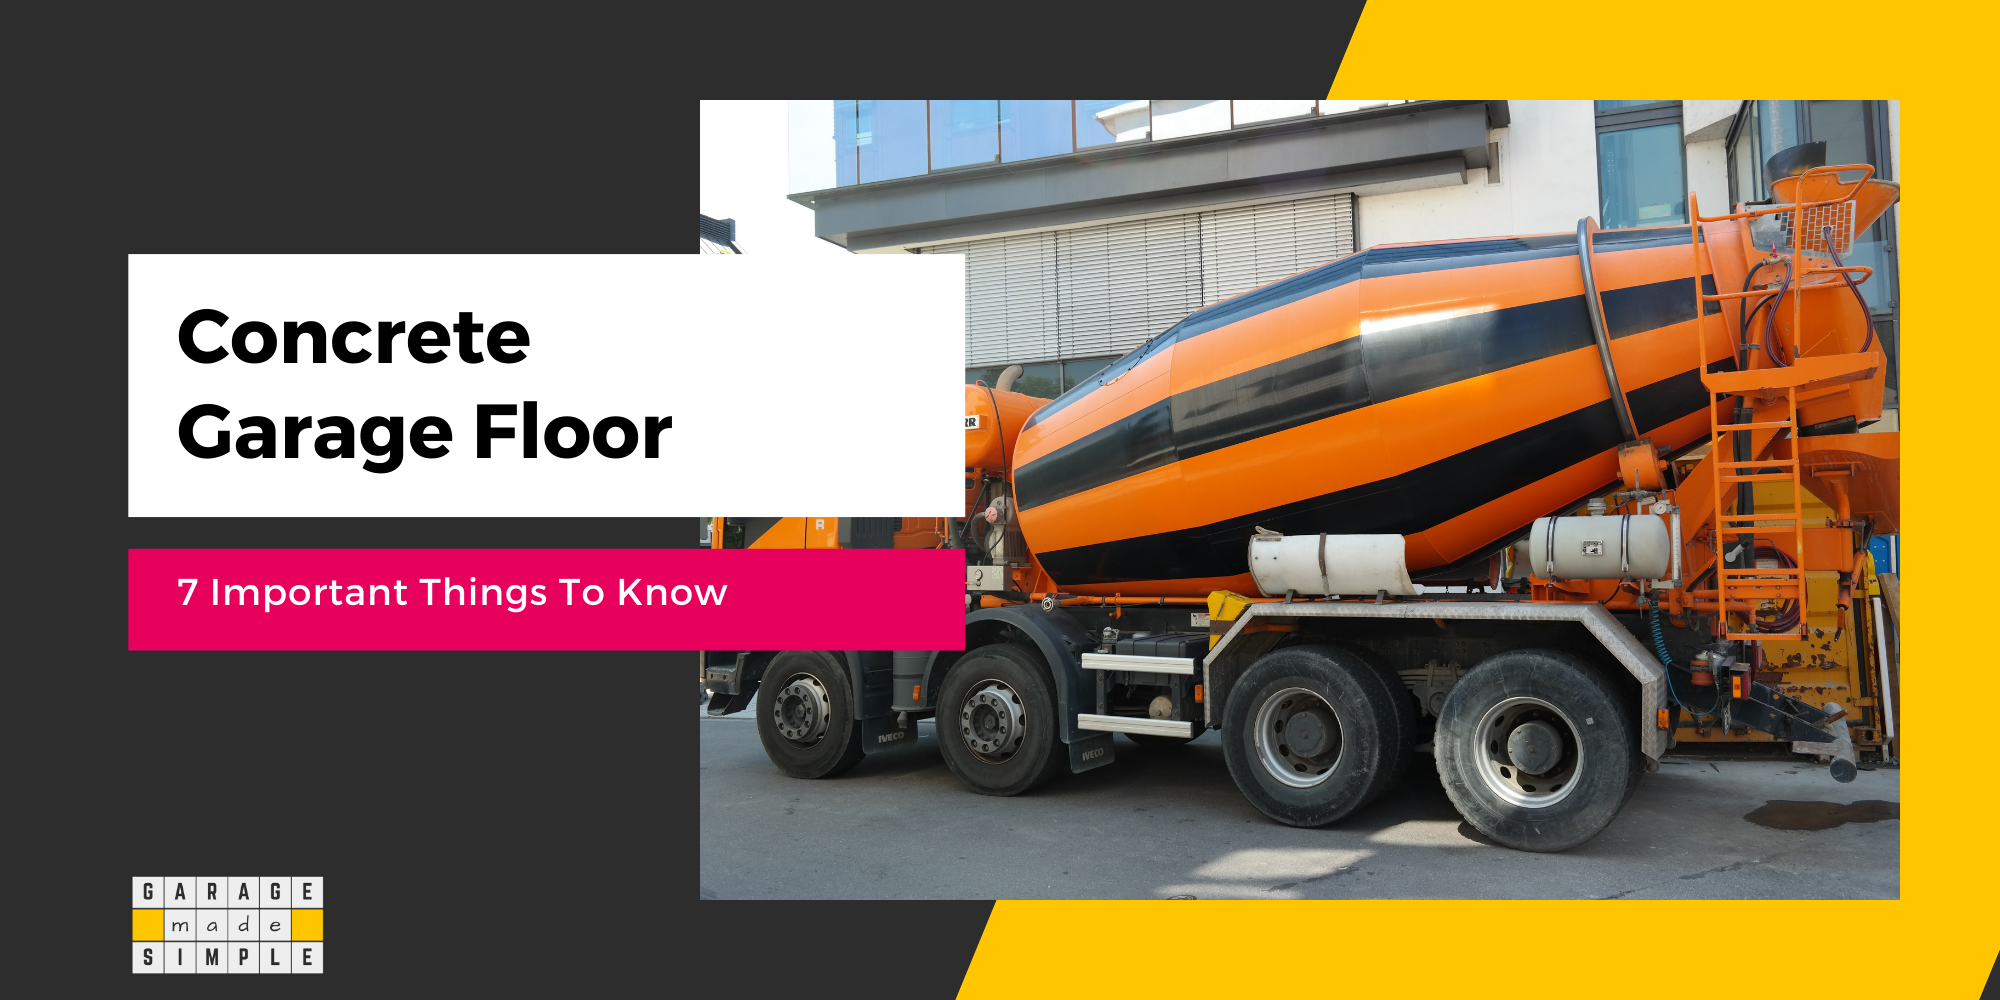 7 Important Things To Know About A Concrete Garage Floor